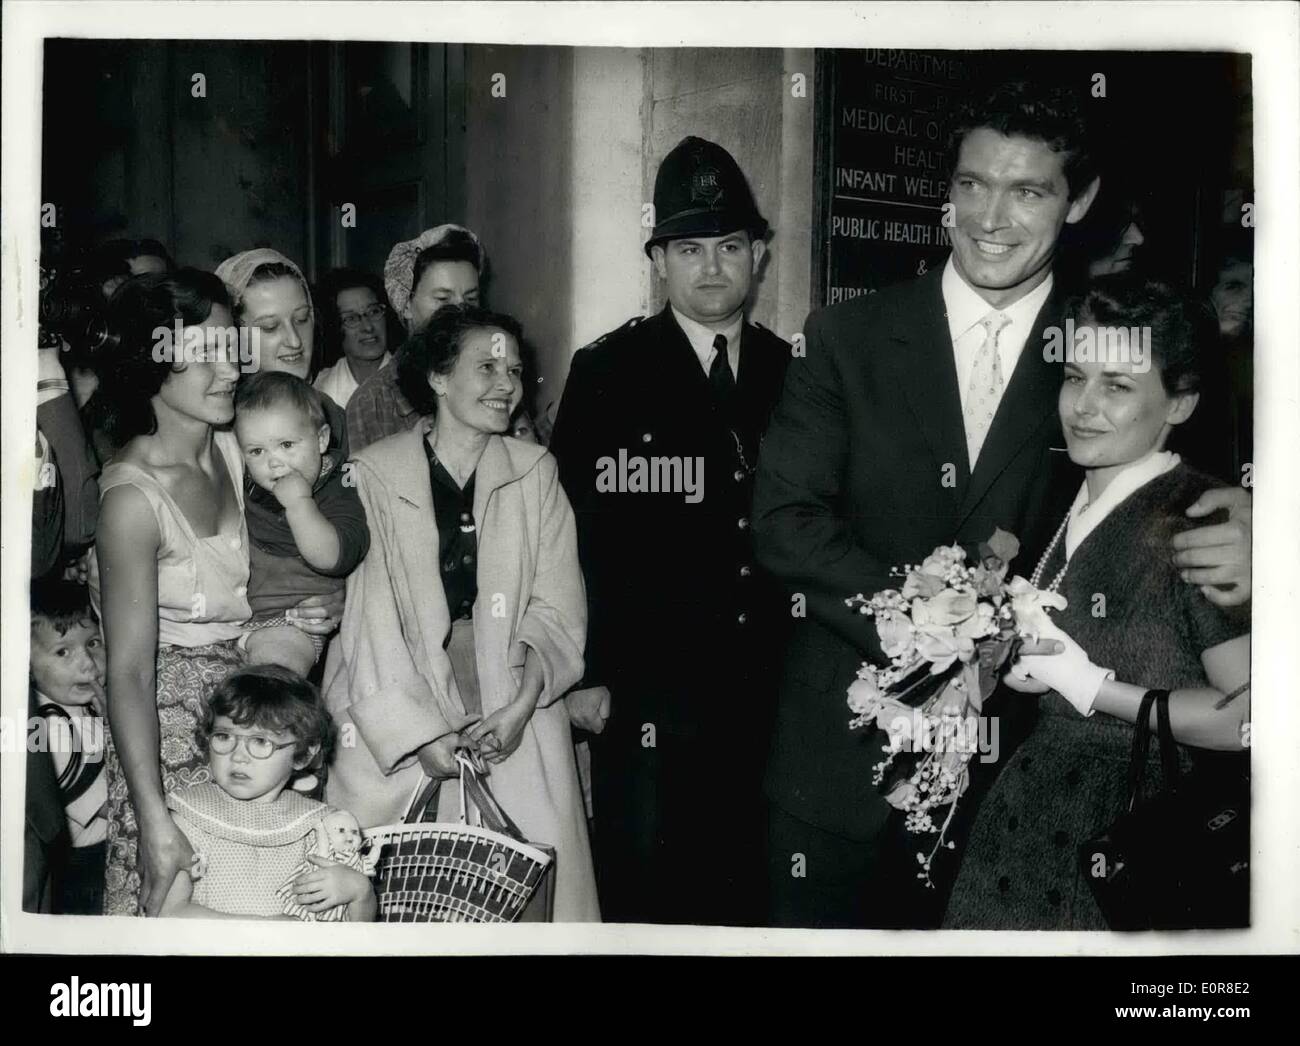 Aug. 08, 1958 - Irish screen actor marries Italian girl at Fulham register office.: Stephen Boyd, the Irishman who rose from a cinema commissionaire in Leicester Square to a 350-a-week film star, was married today to pretty Italian girl Mariella di Sarzana, at, Fulham Register Office. The couple will fly back to Rome for Stephen to resume worn on Monday on a new film version of ''Ben Hur''. Photo shows the happy couple pose for their picture watched by some of the people who gathered outsider the register office to see the couple. Stock Photo